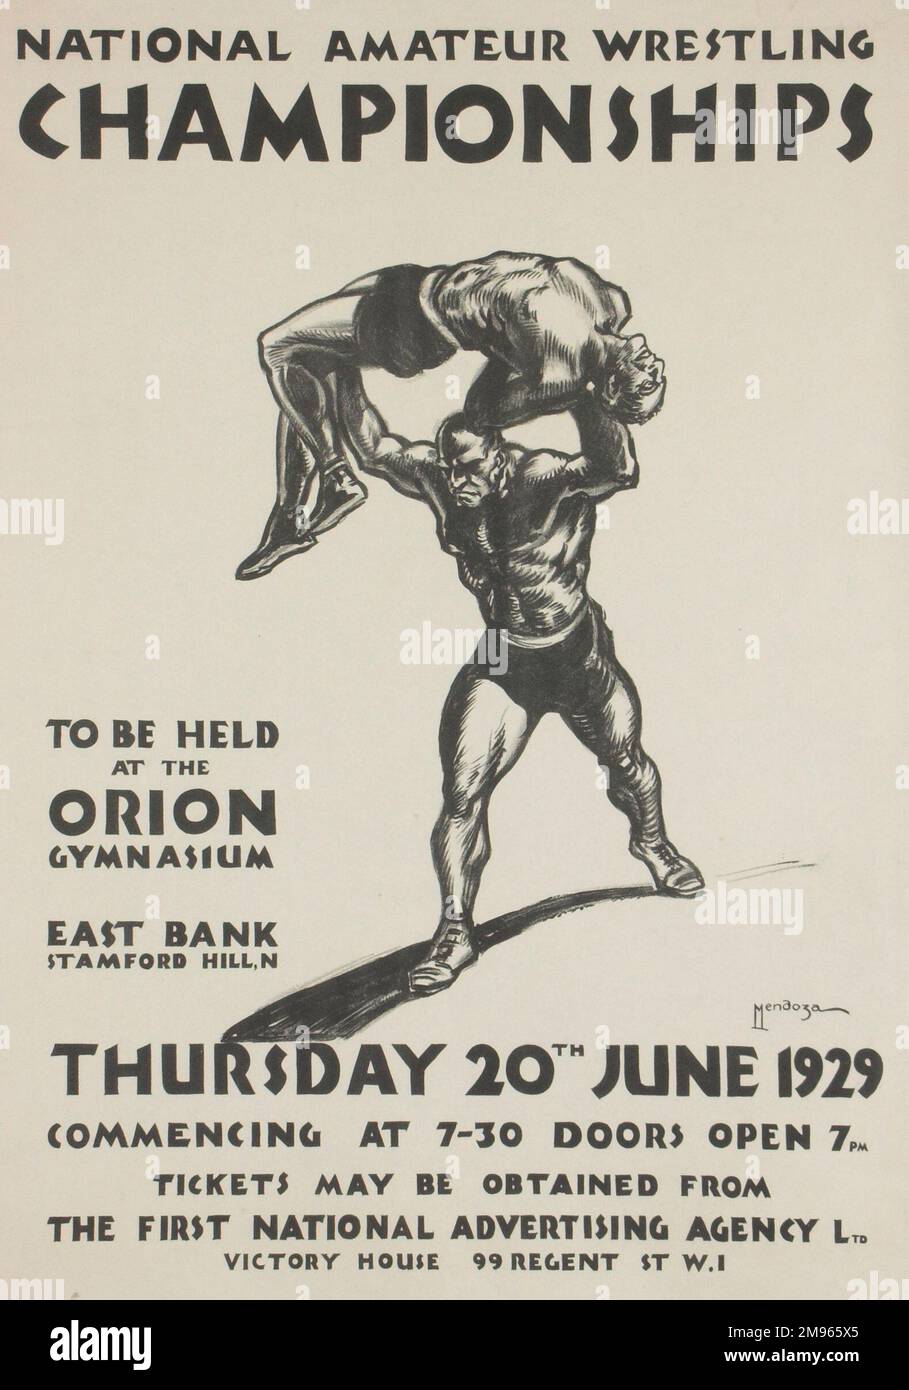 Poster advertising the National Amateur Wrestling Championships to be held at the Orion Gymnasium, East Bank, Stamford Hill, North London on 20 June 1929. Stock Photo